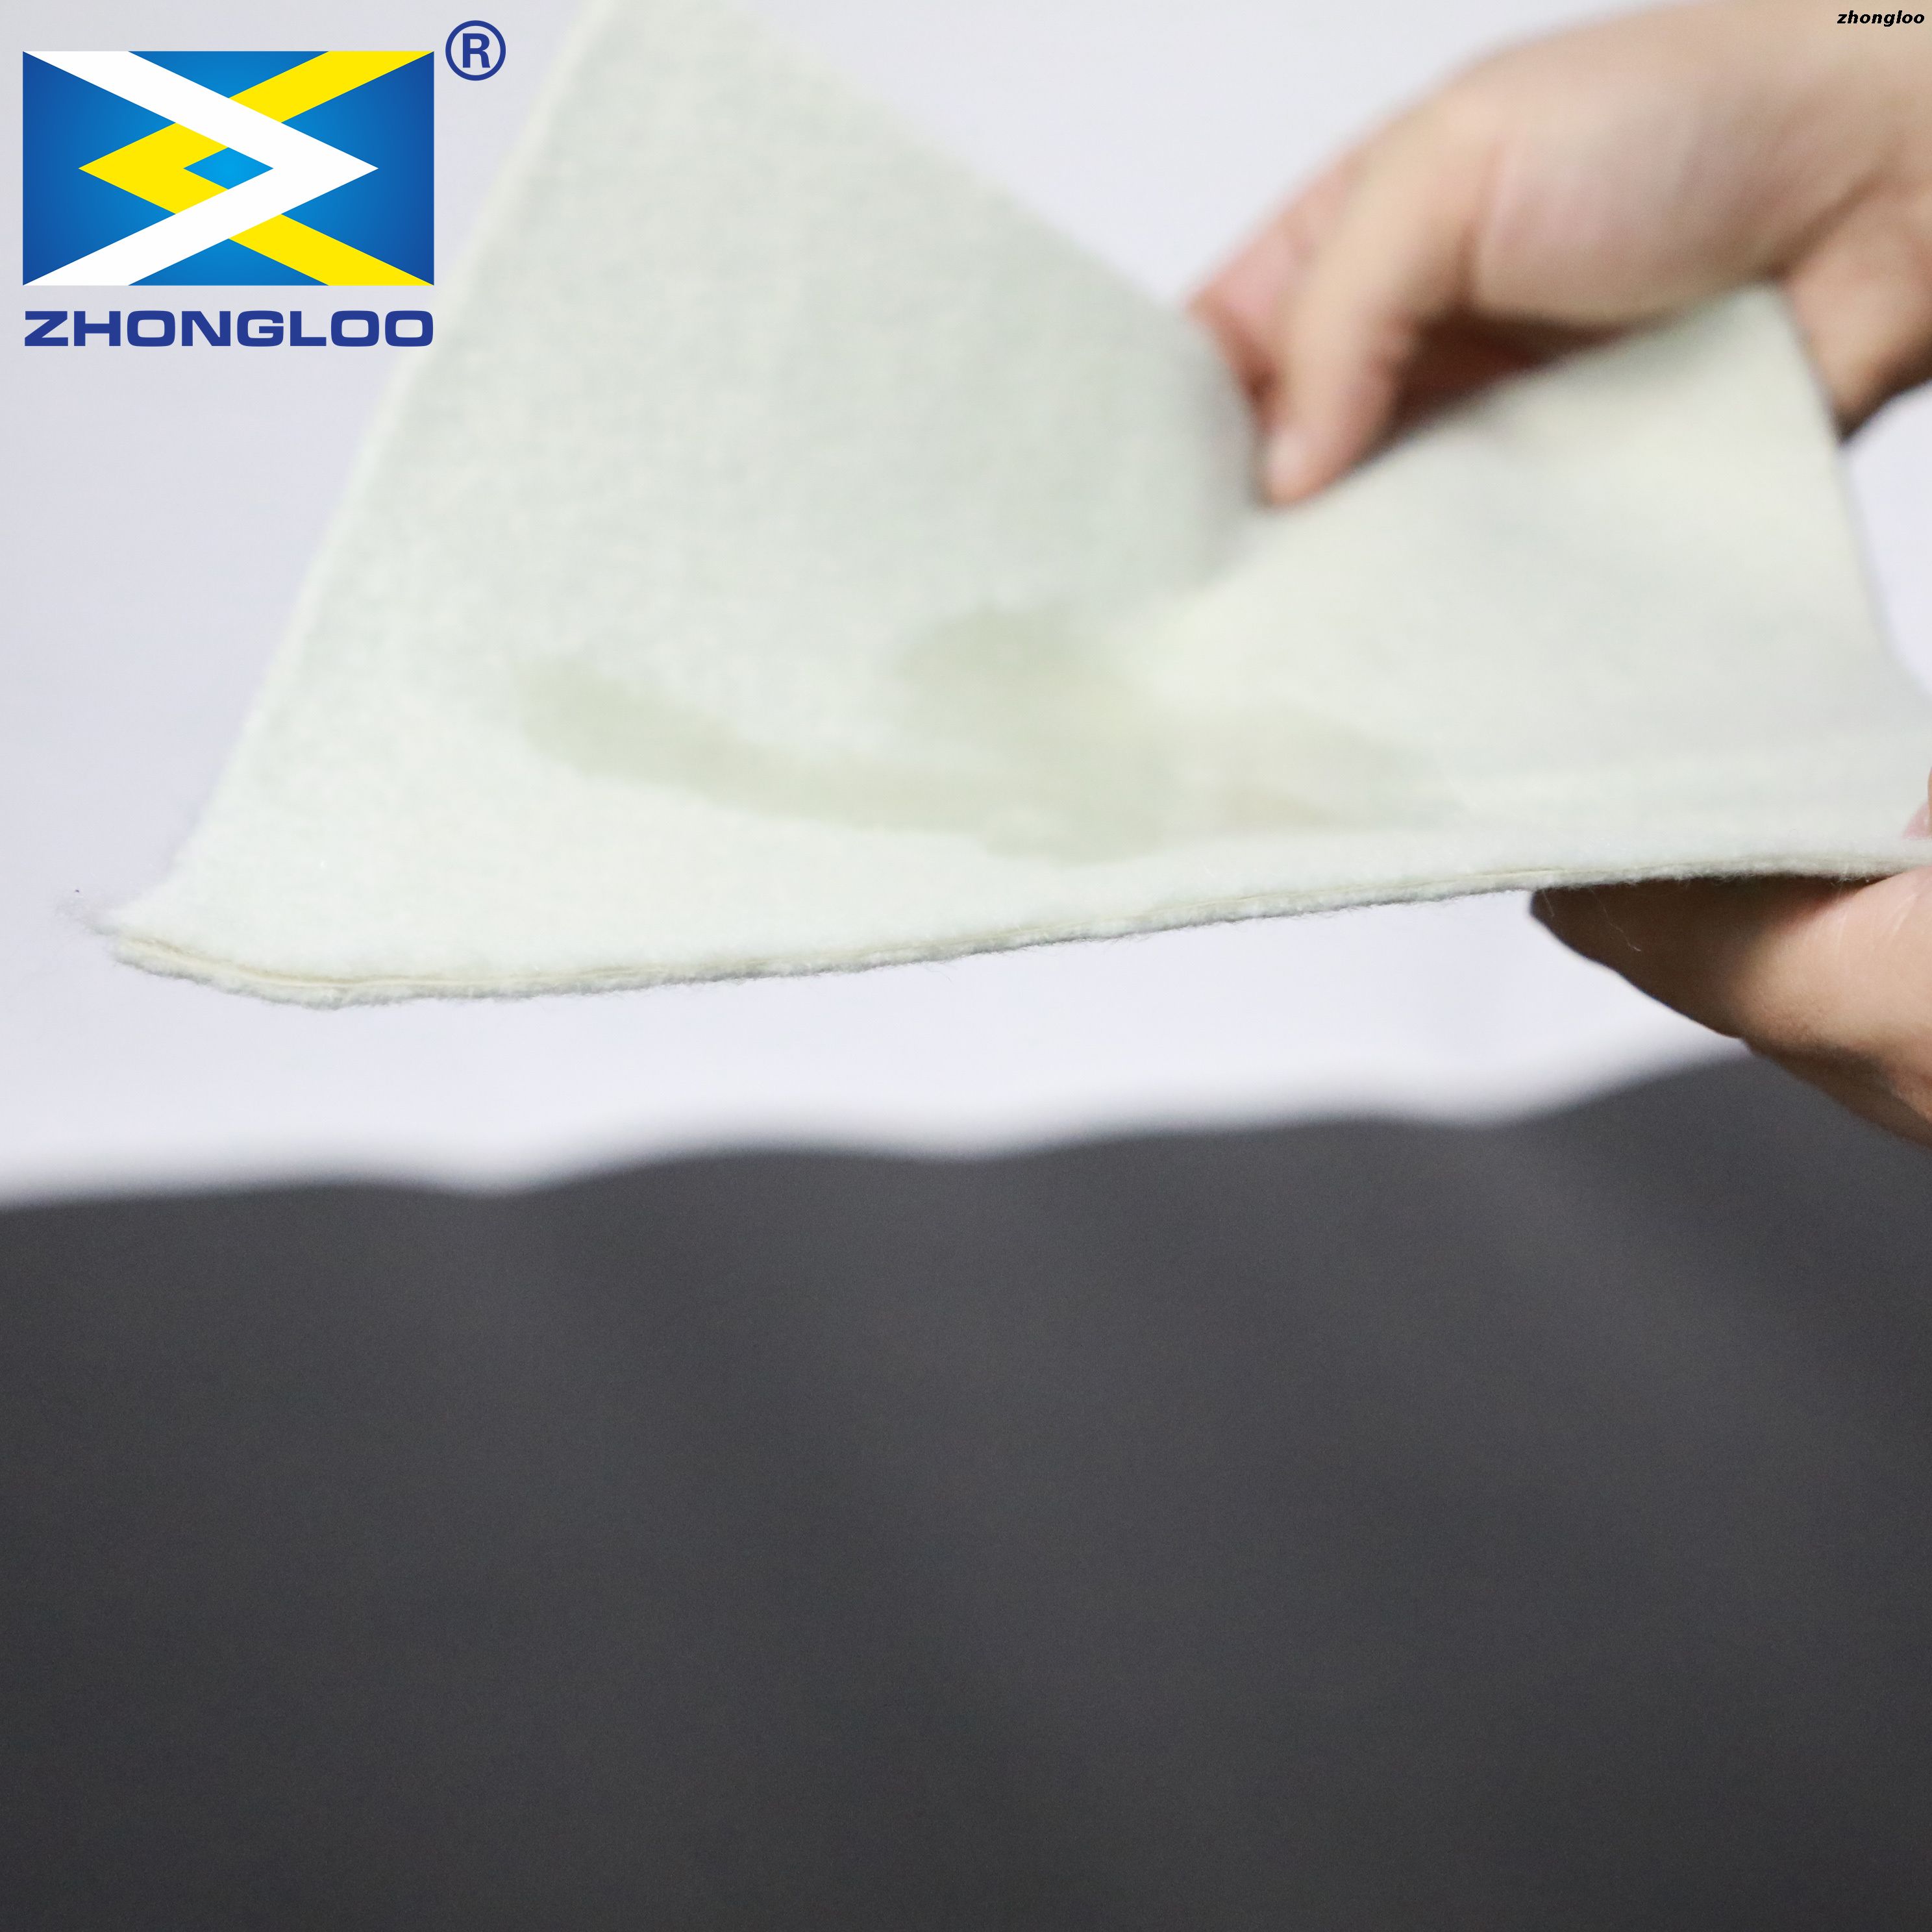 800g/m2 Waterproofing Sheet Material of Composite Geomembrane Geotextile 